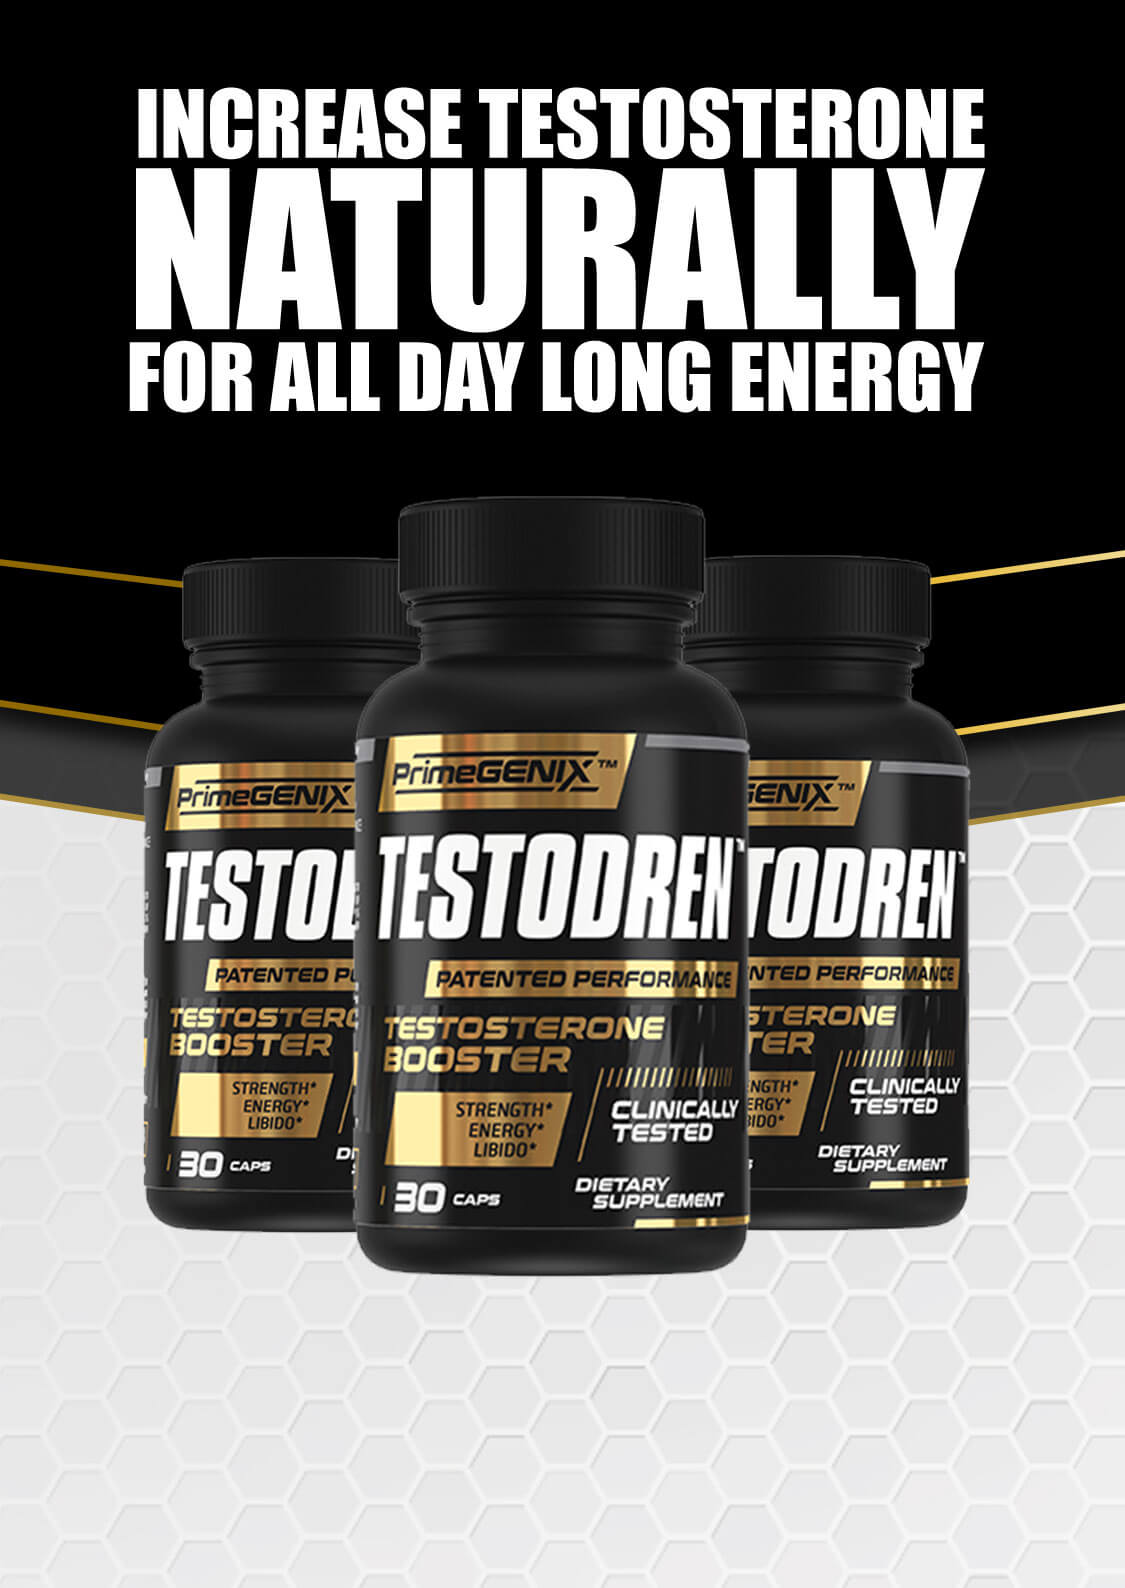 Increase Testosterone Naturally For all Day Long Energy